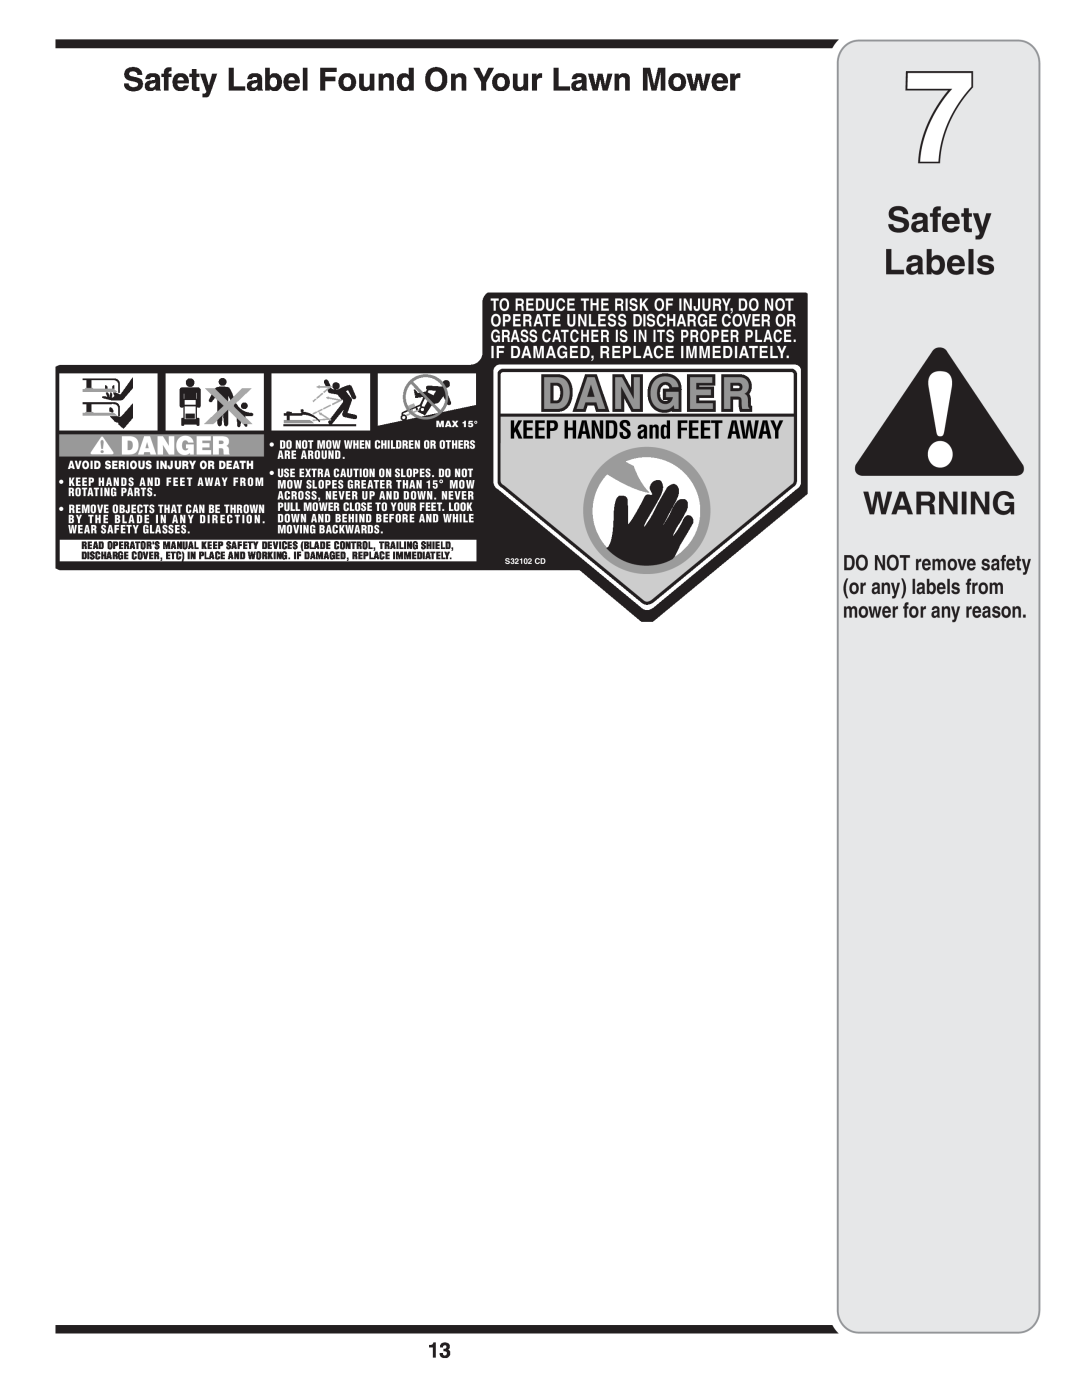 MTD Series 580 Safety Labels, Safety Label Found On Your Lawn Mower, KEEP HANDS and FEET AWAY, Are Around, Rotating Parts 